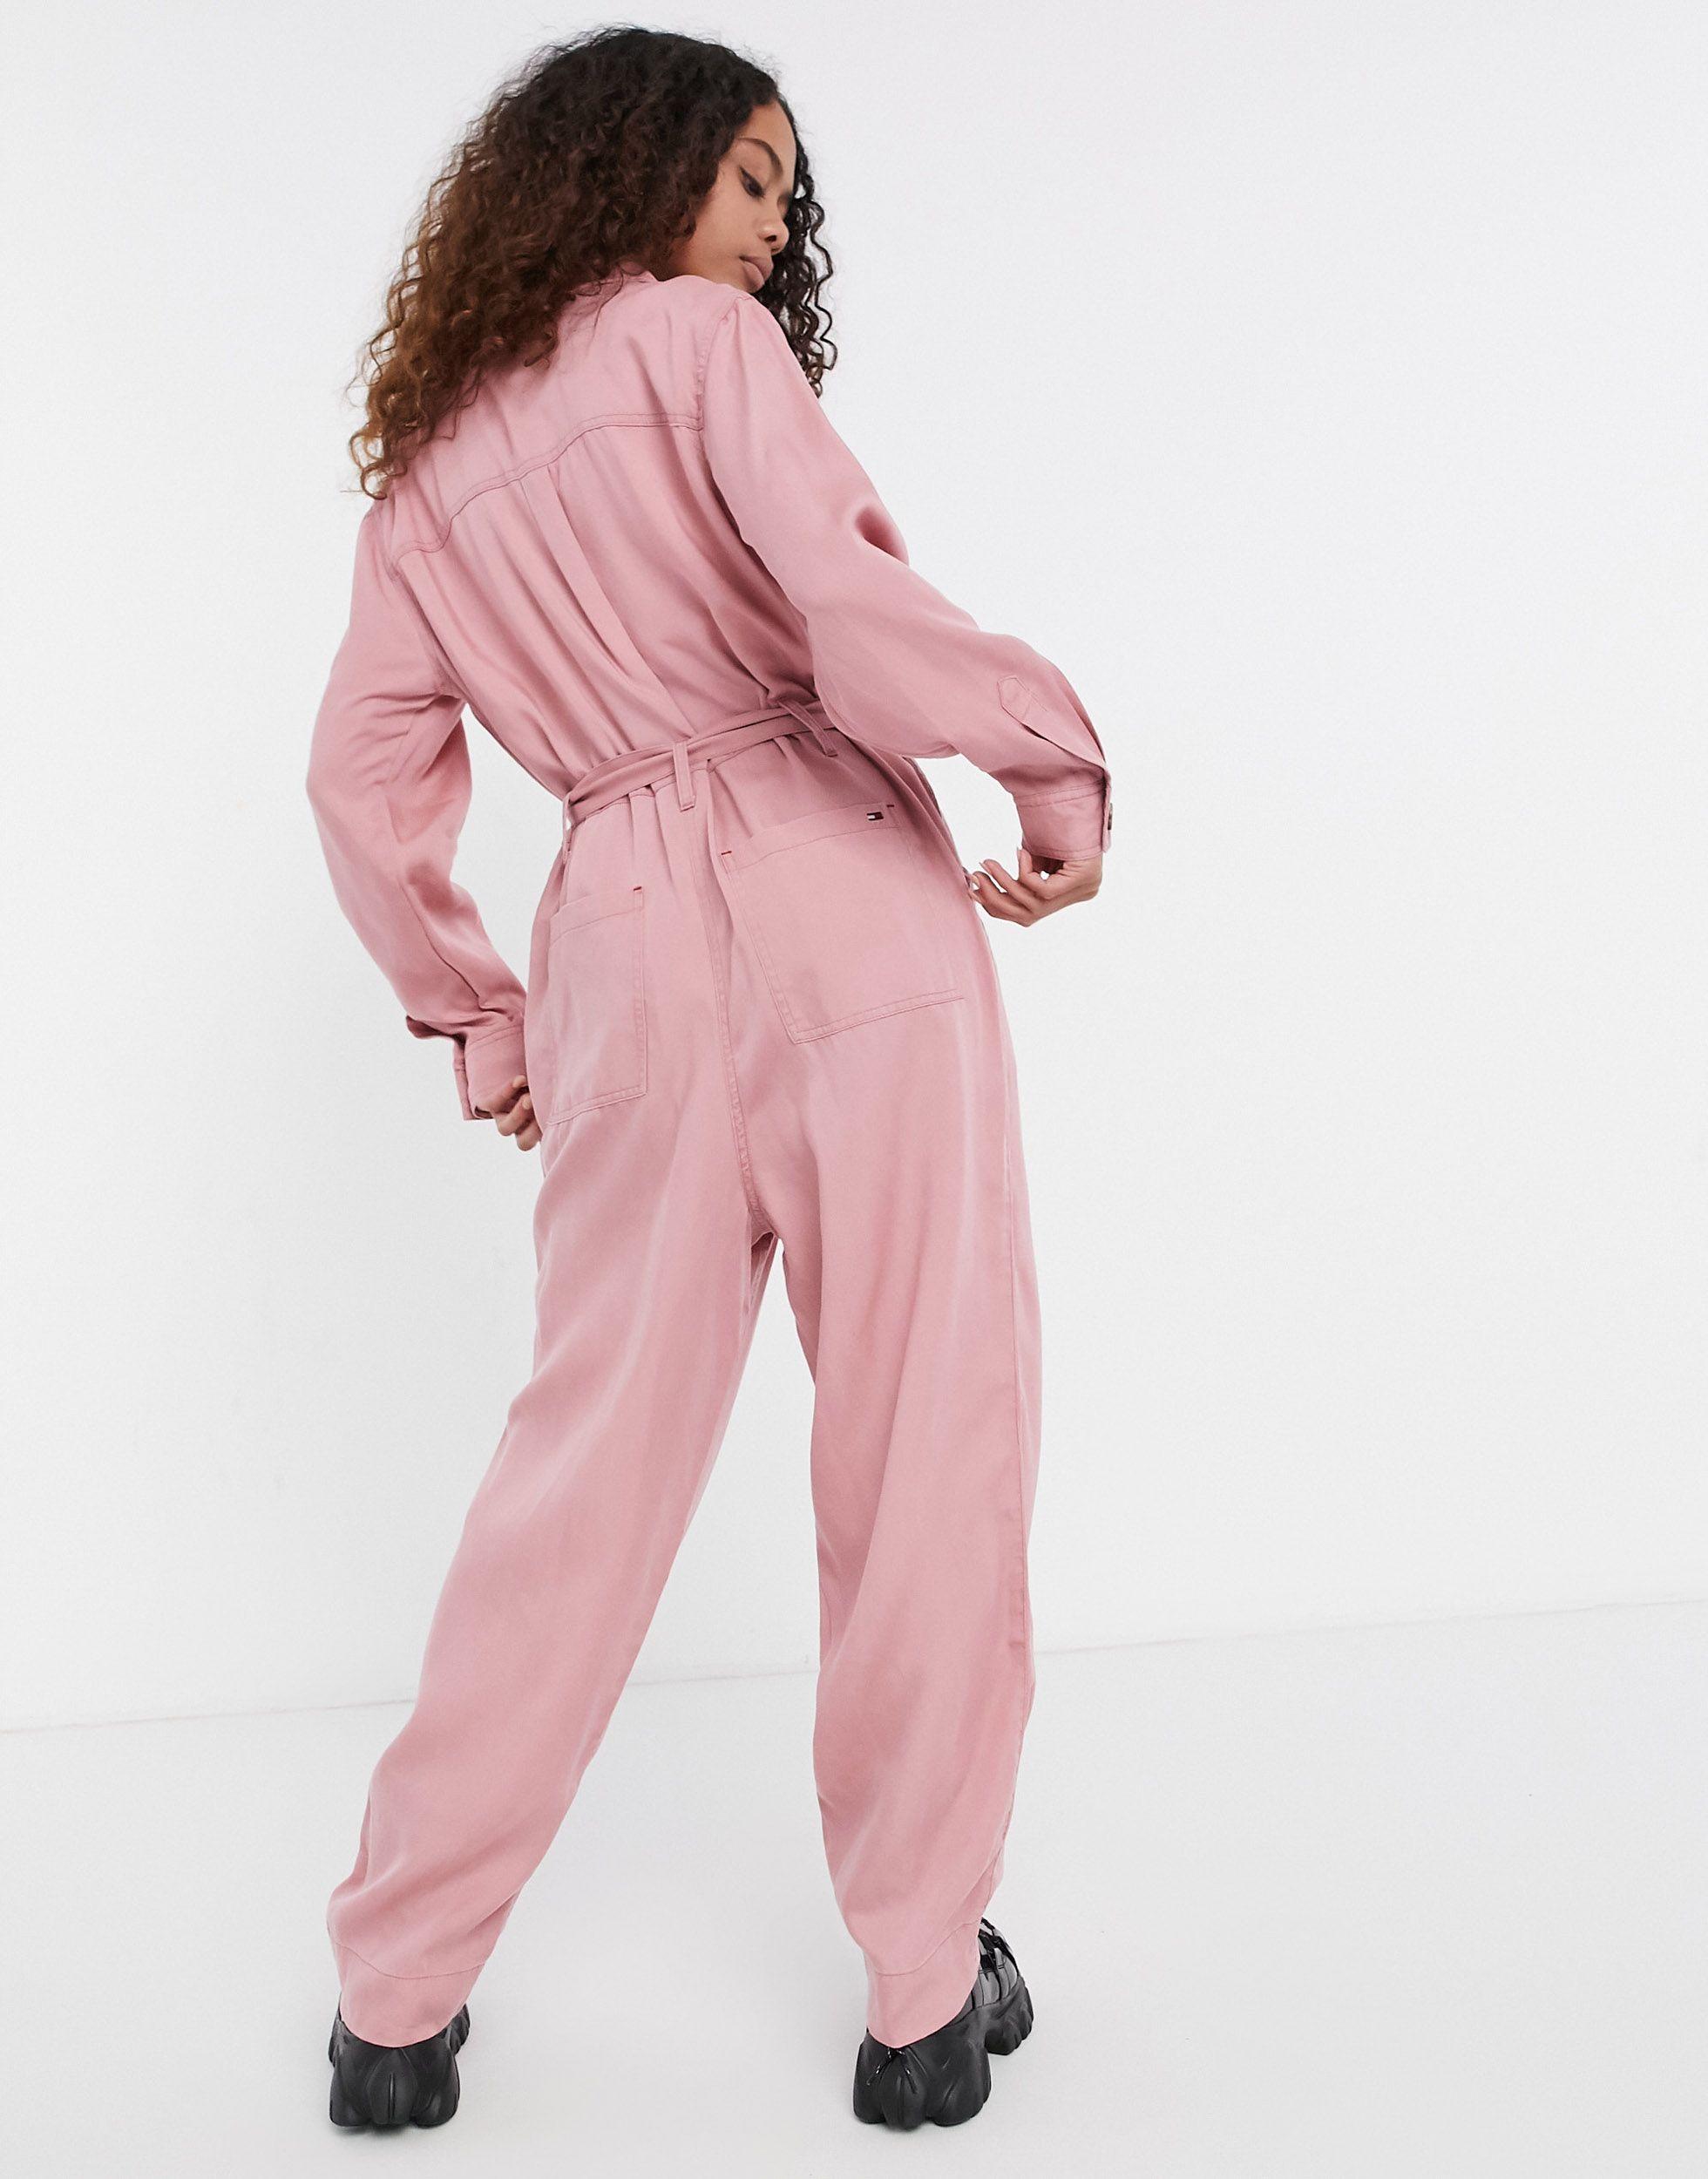 Tommy Hilfiger Utility Jumpsuit in Pink - Lyst